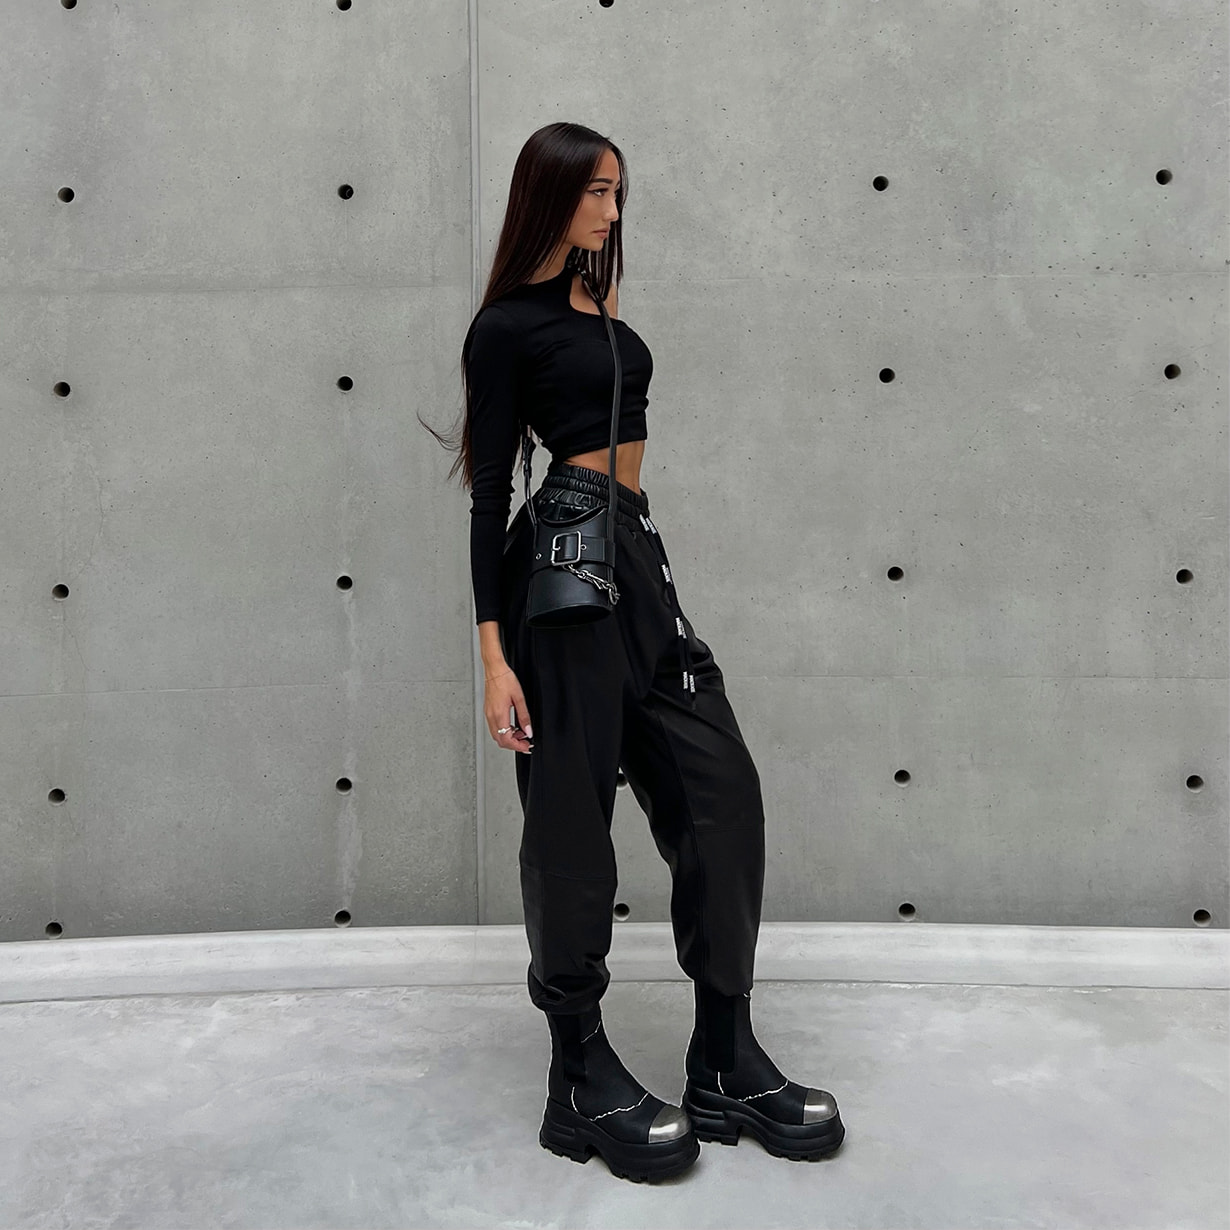 Women’s Jules Leather Chelsea Boots and Jules Leather Belted Bucket Bag, both in black  – CHARLES & KEITH